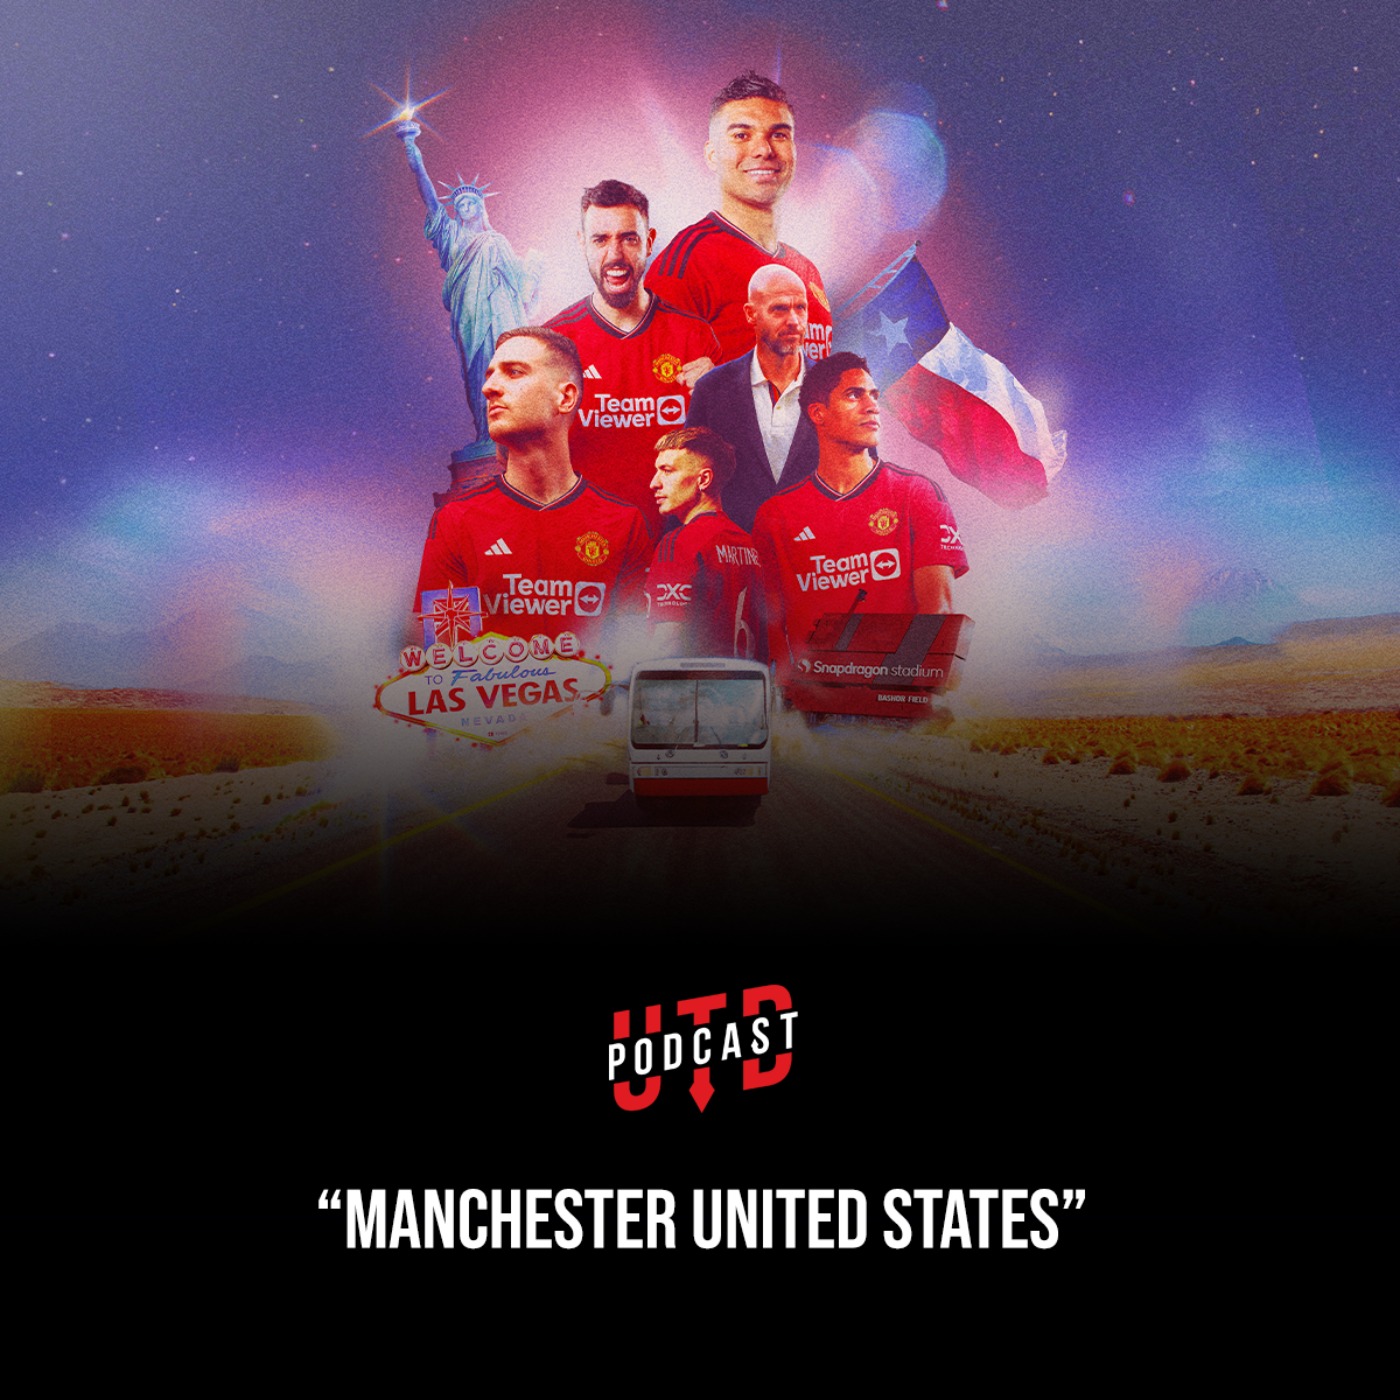 Manchester United States